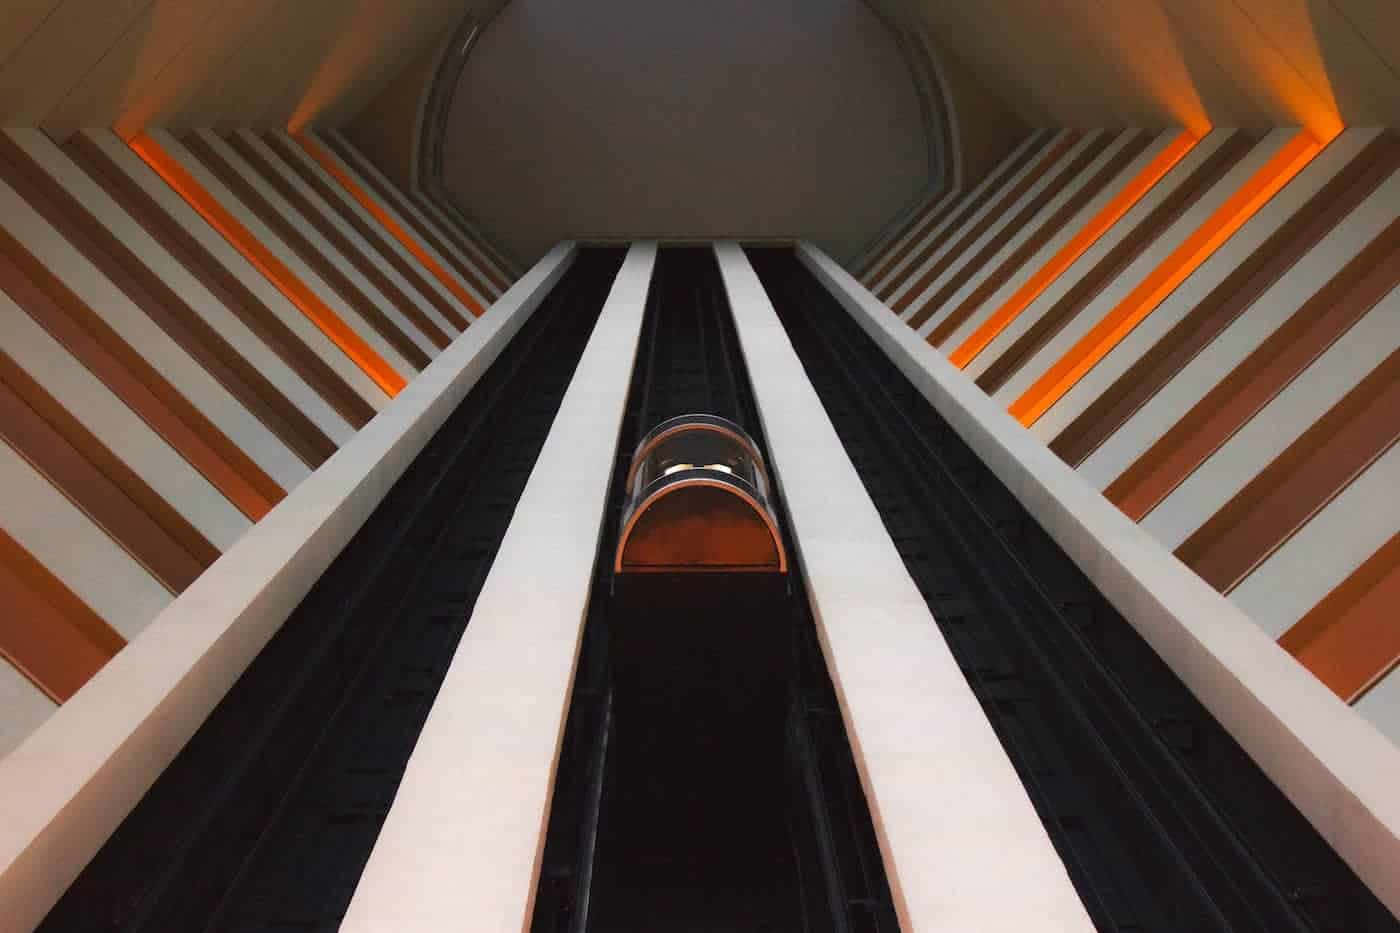 Ride High: An interior view of an elevator